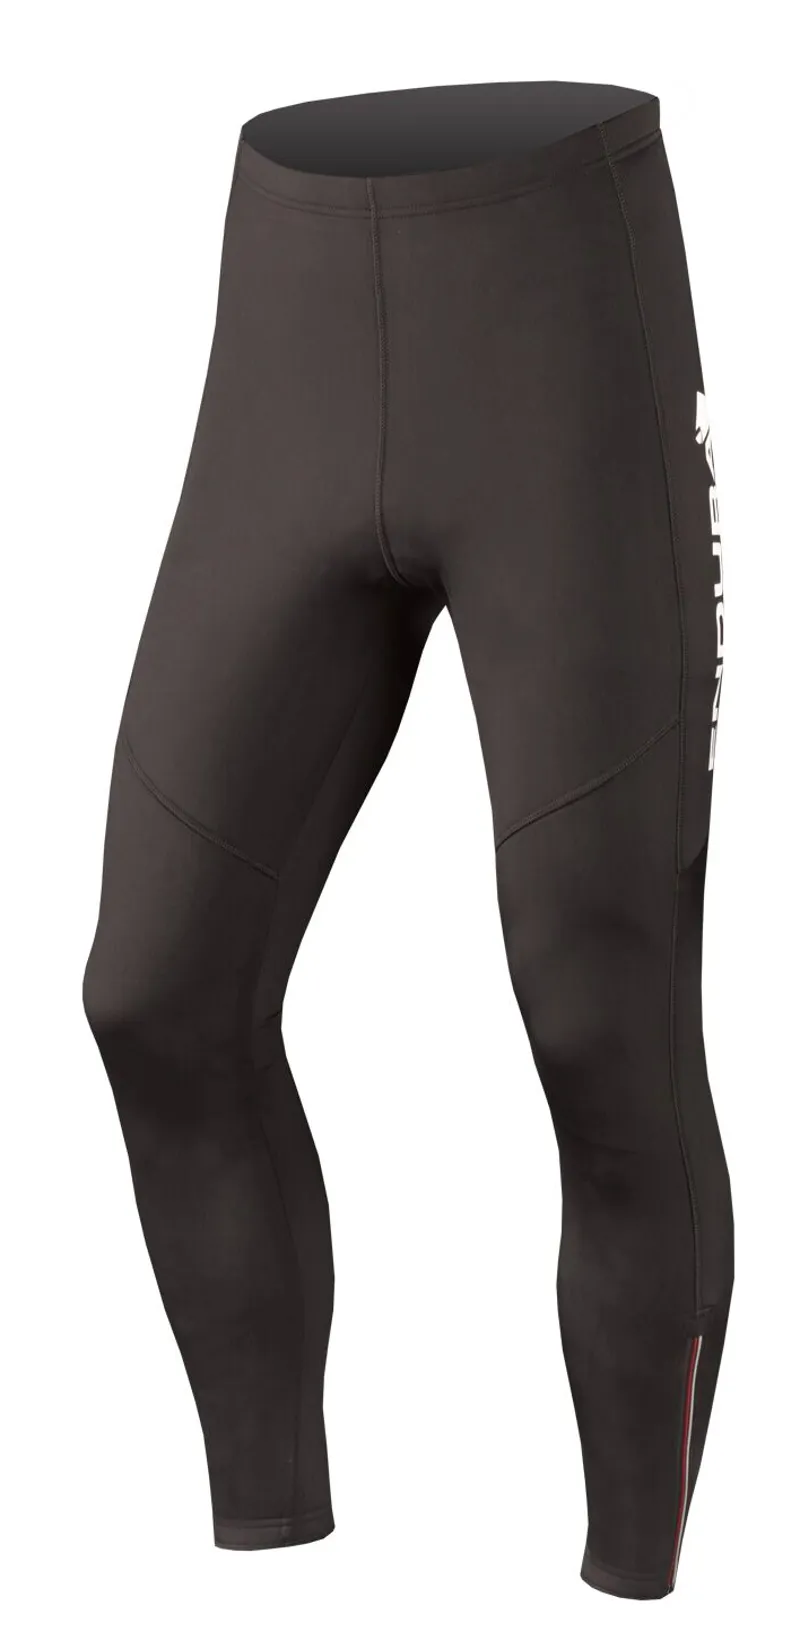 https://www.leisurelakesbikes.com/images/endura-thermolite-tights-with-pad-1.png